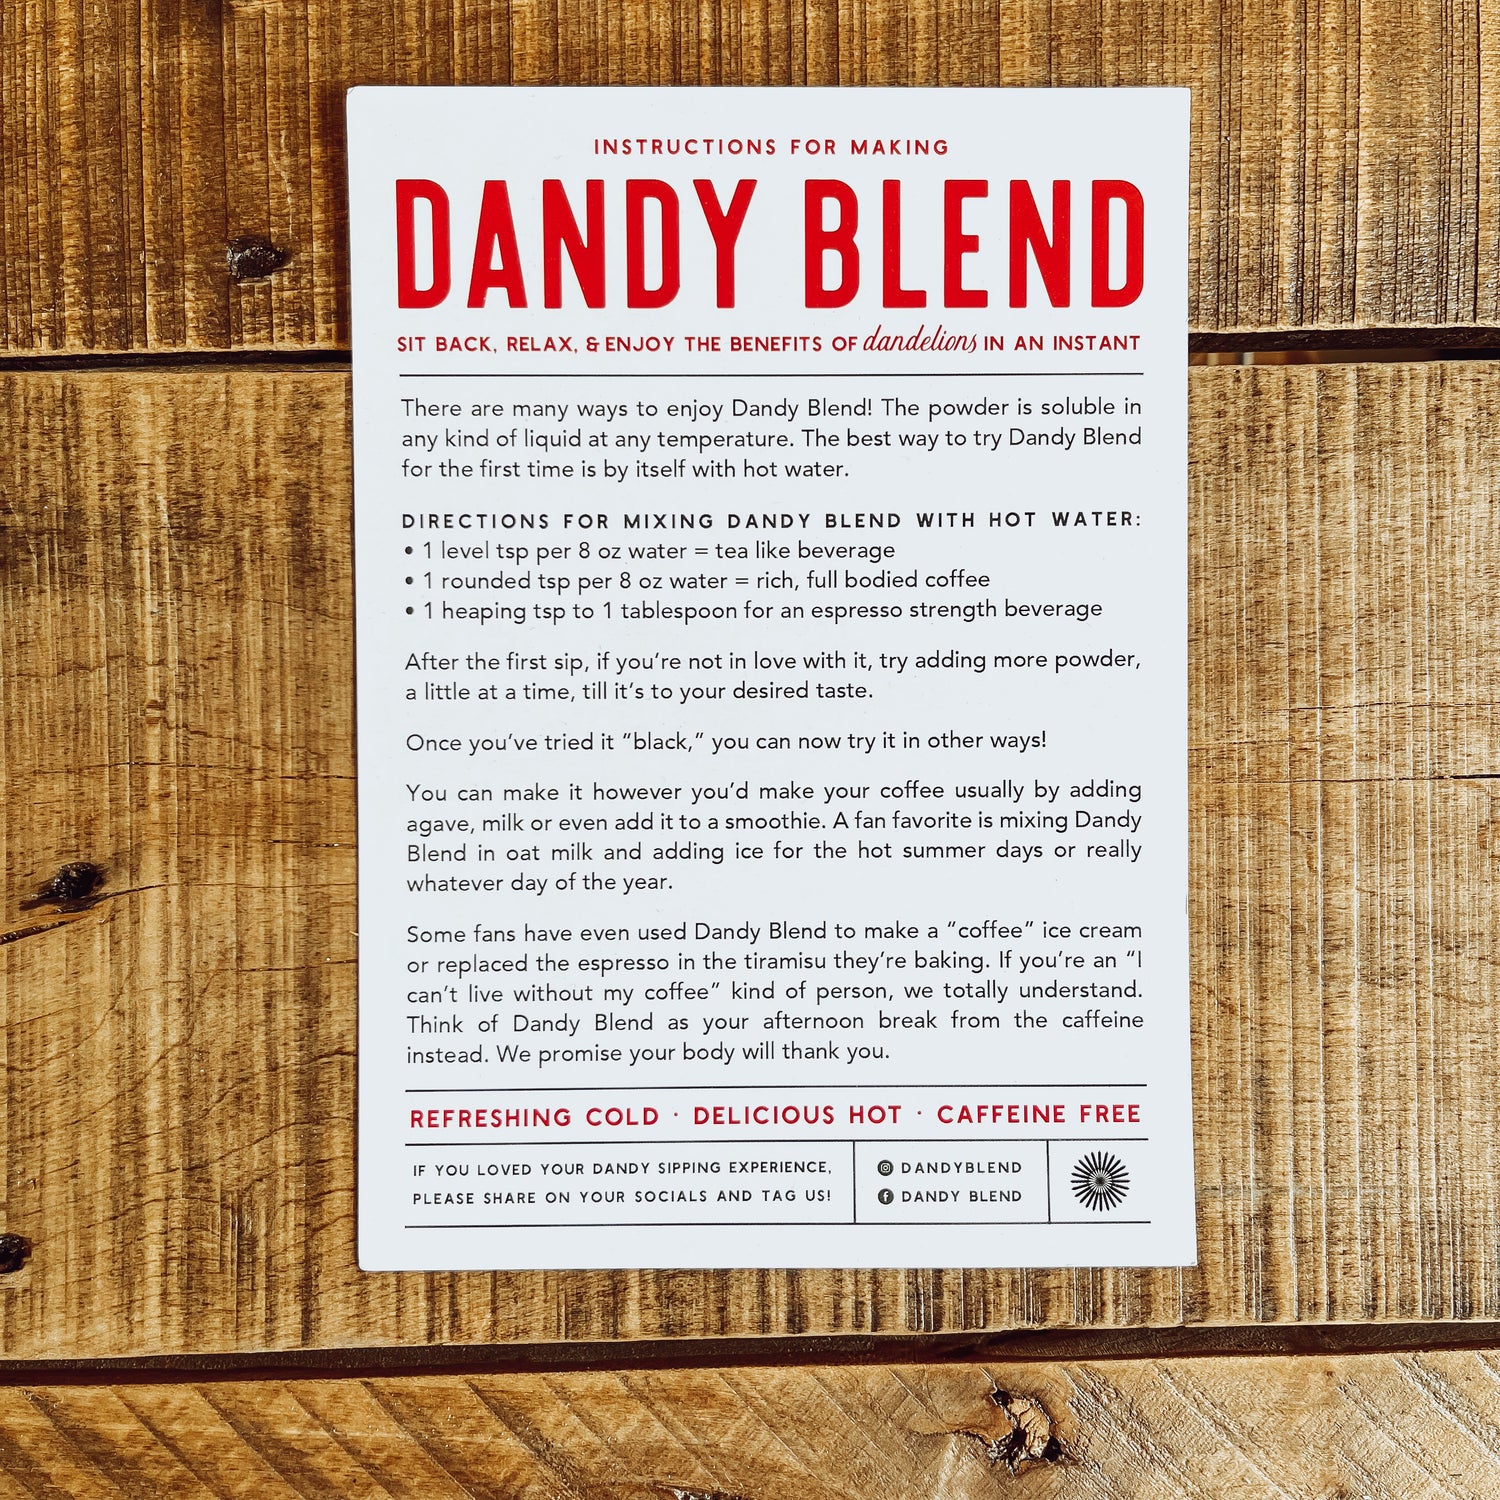 Two bags of Original Dandy Blend Instant Herbal Beverage with